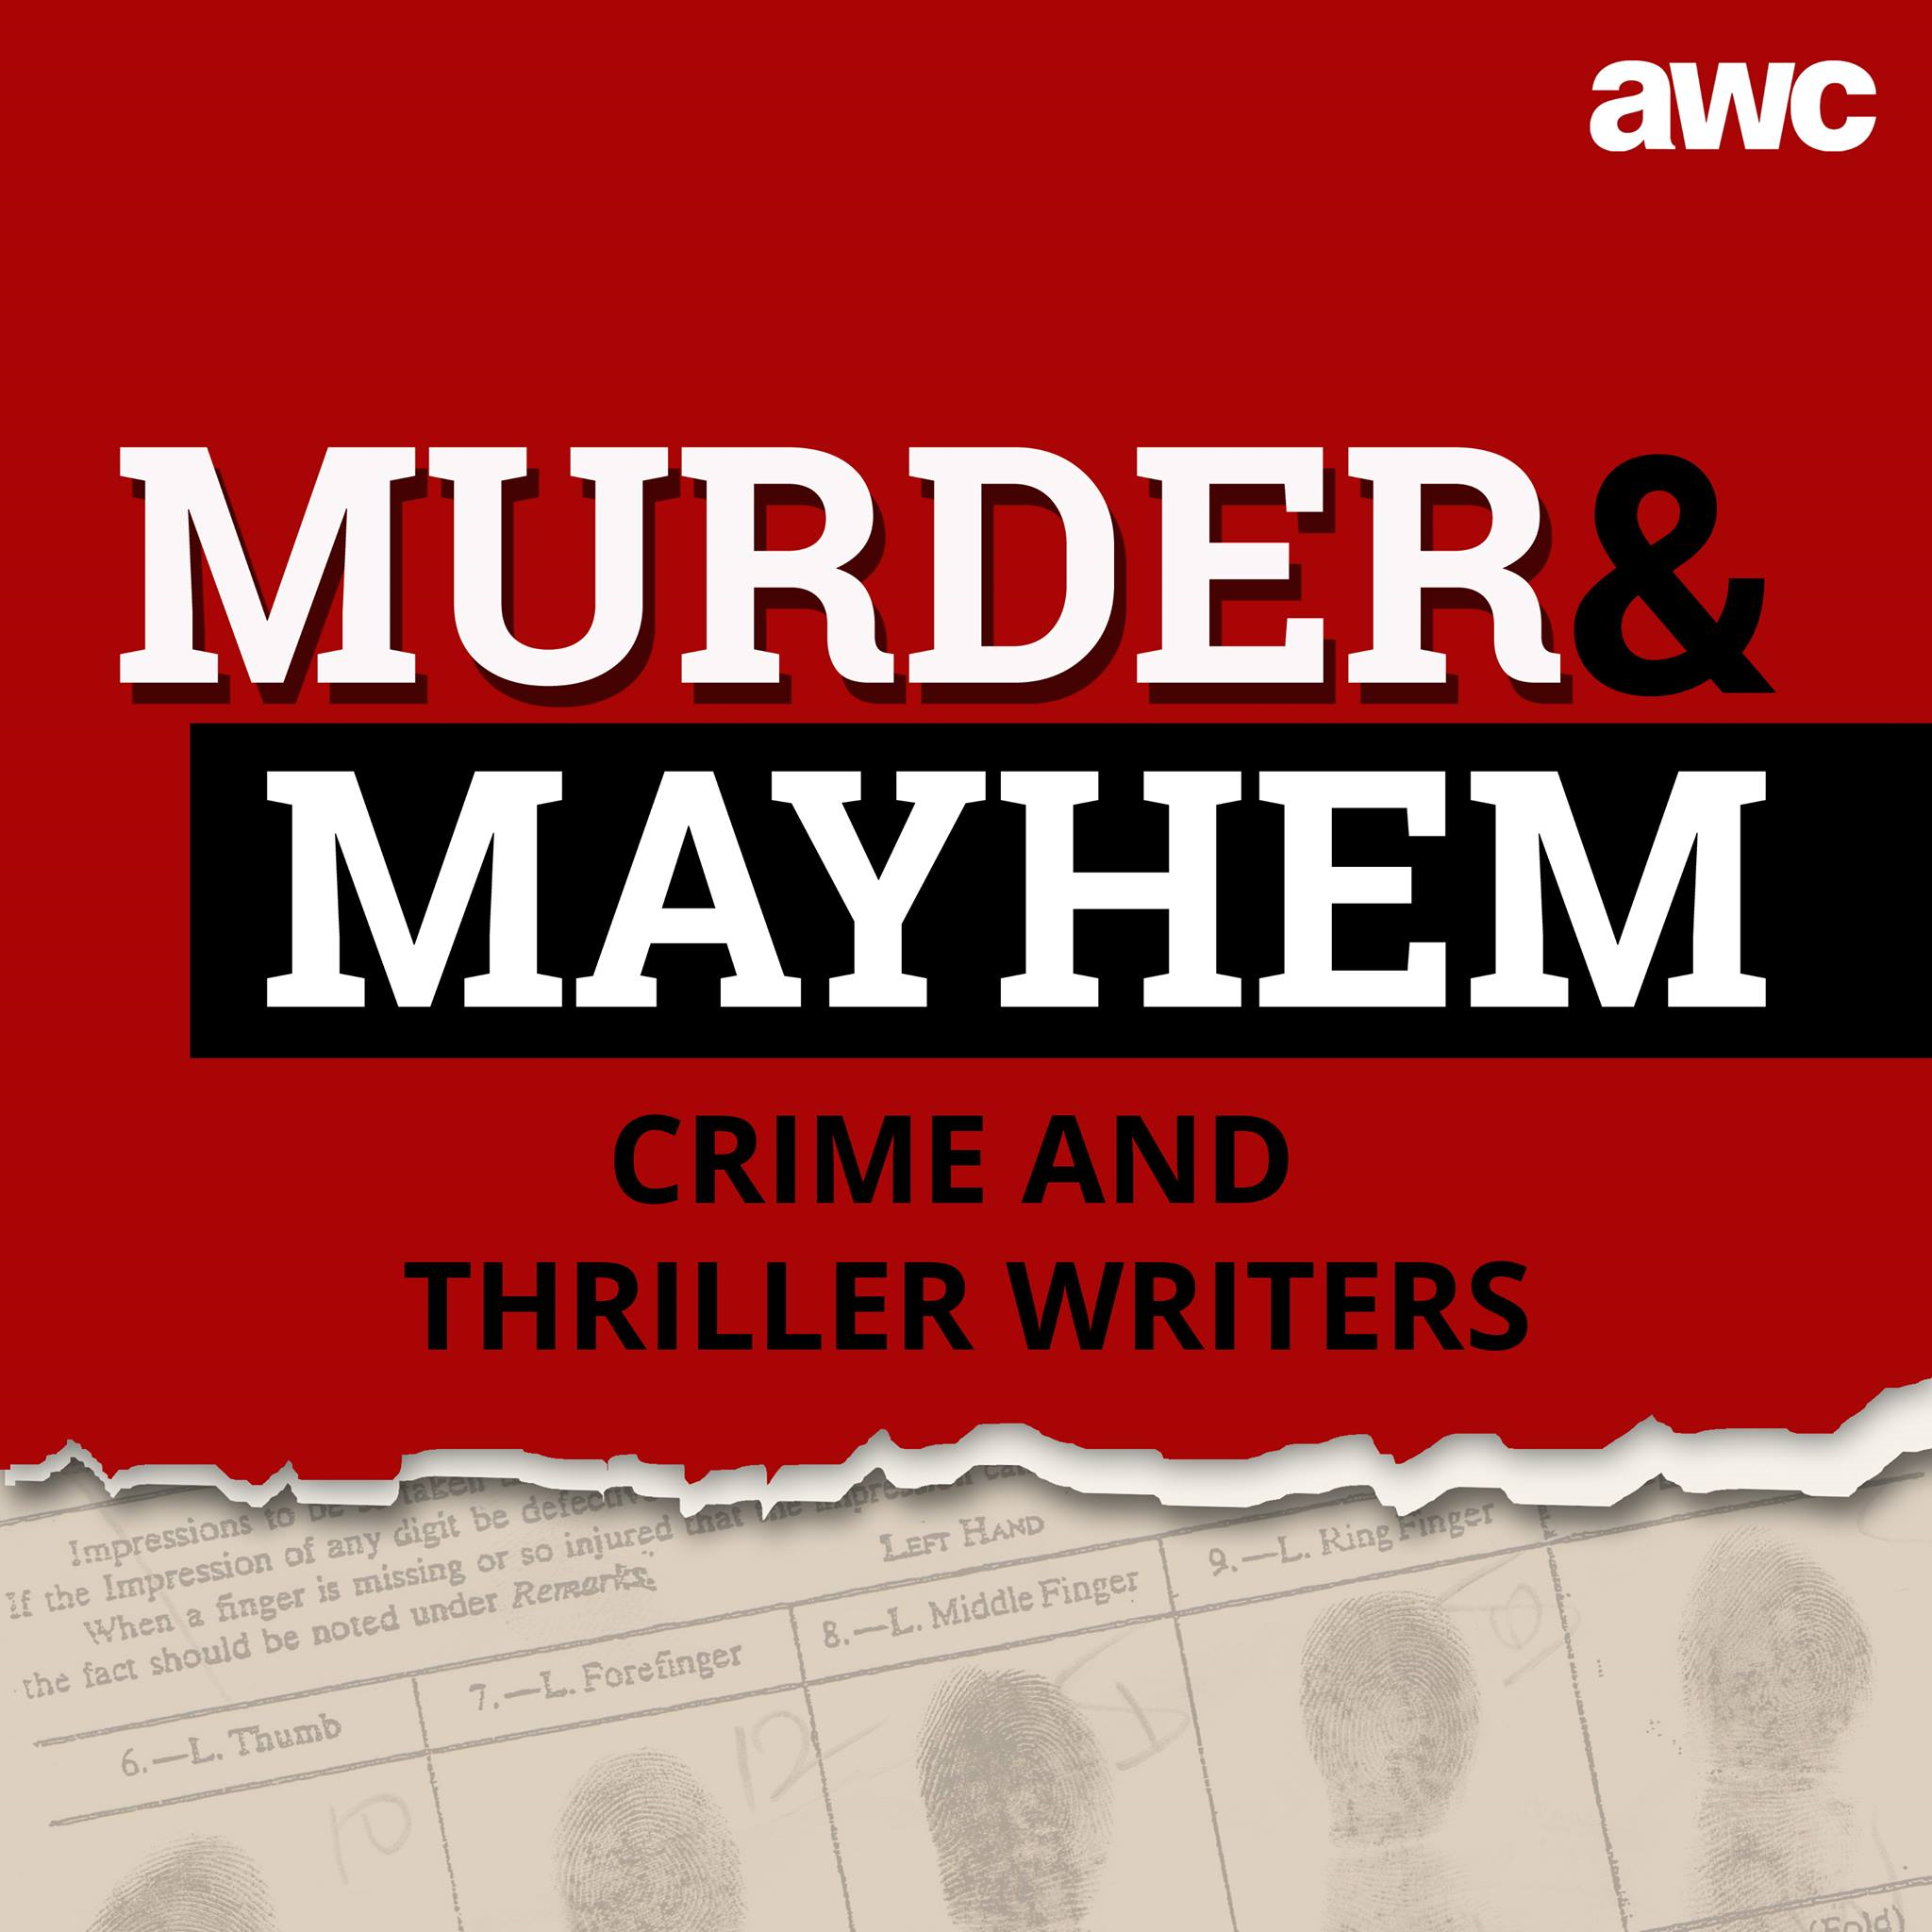 MURDER MAYHEM 10: Barry Maitland is an award winning author of crime fiction including the acclaimed Brock and Kolla series, as well as Bright Air and the new Belltree Trilogy. @barrymaitlandau